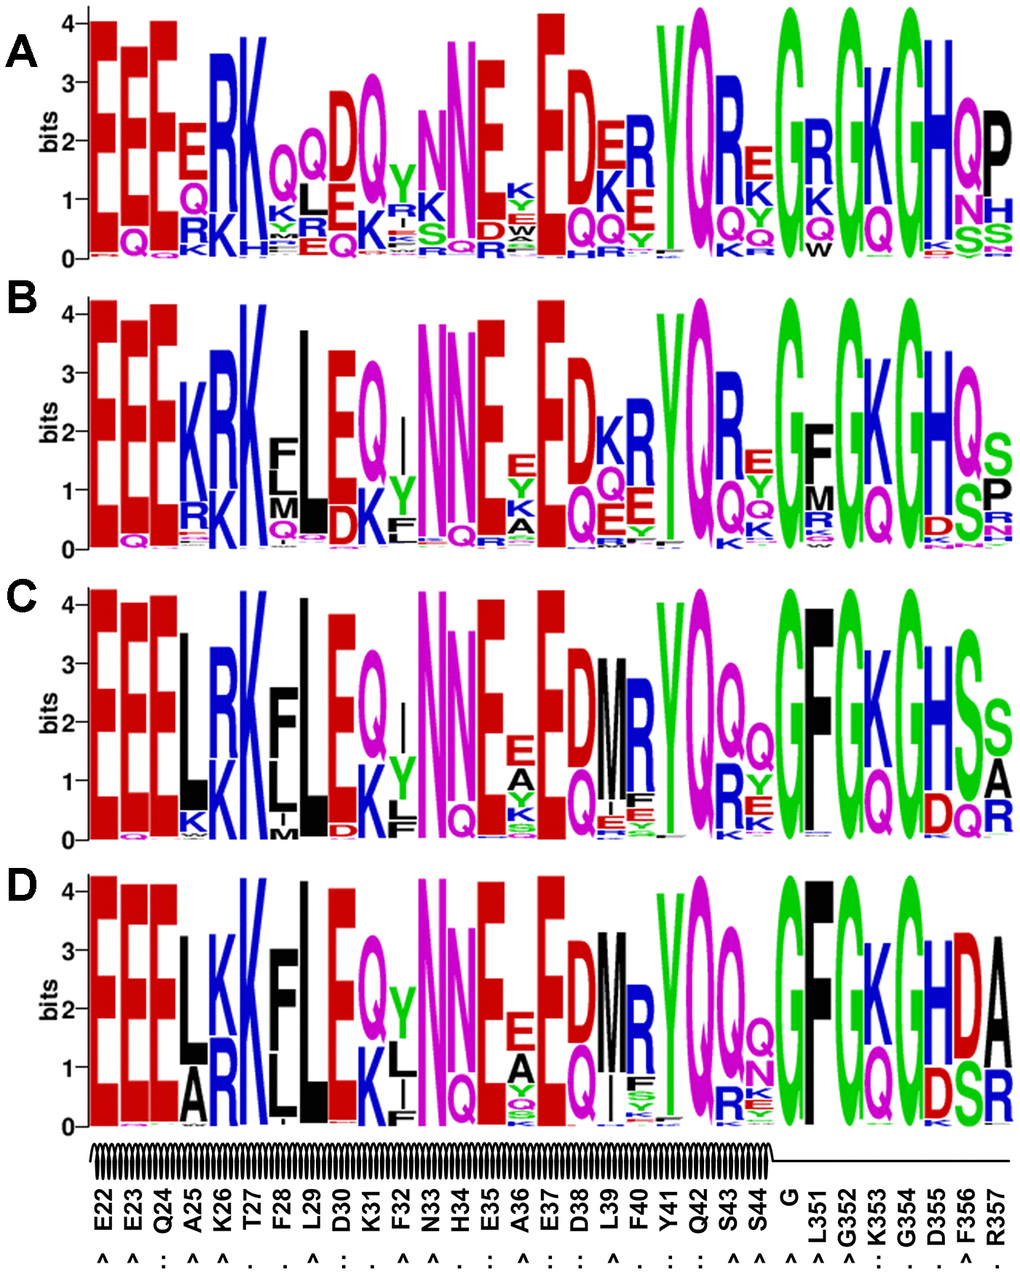 Sequence logo analysis of the evolution-based design results. Four sets of profile energy weight were used: 0.25 (A), 0.50 (B), 0.75 (C) and 1.00 (D).